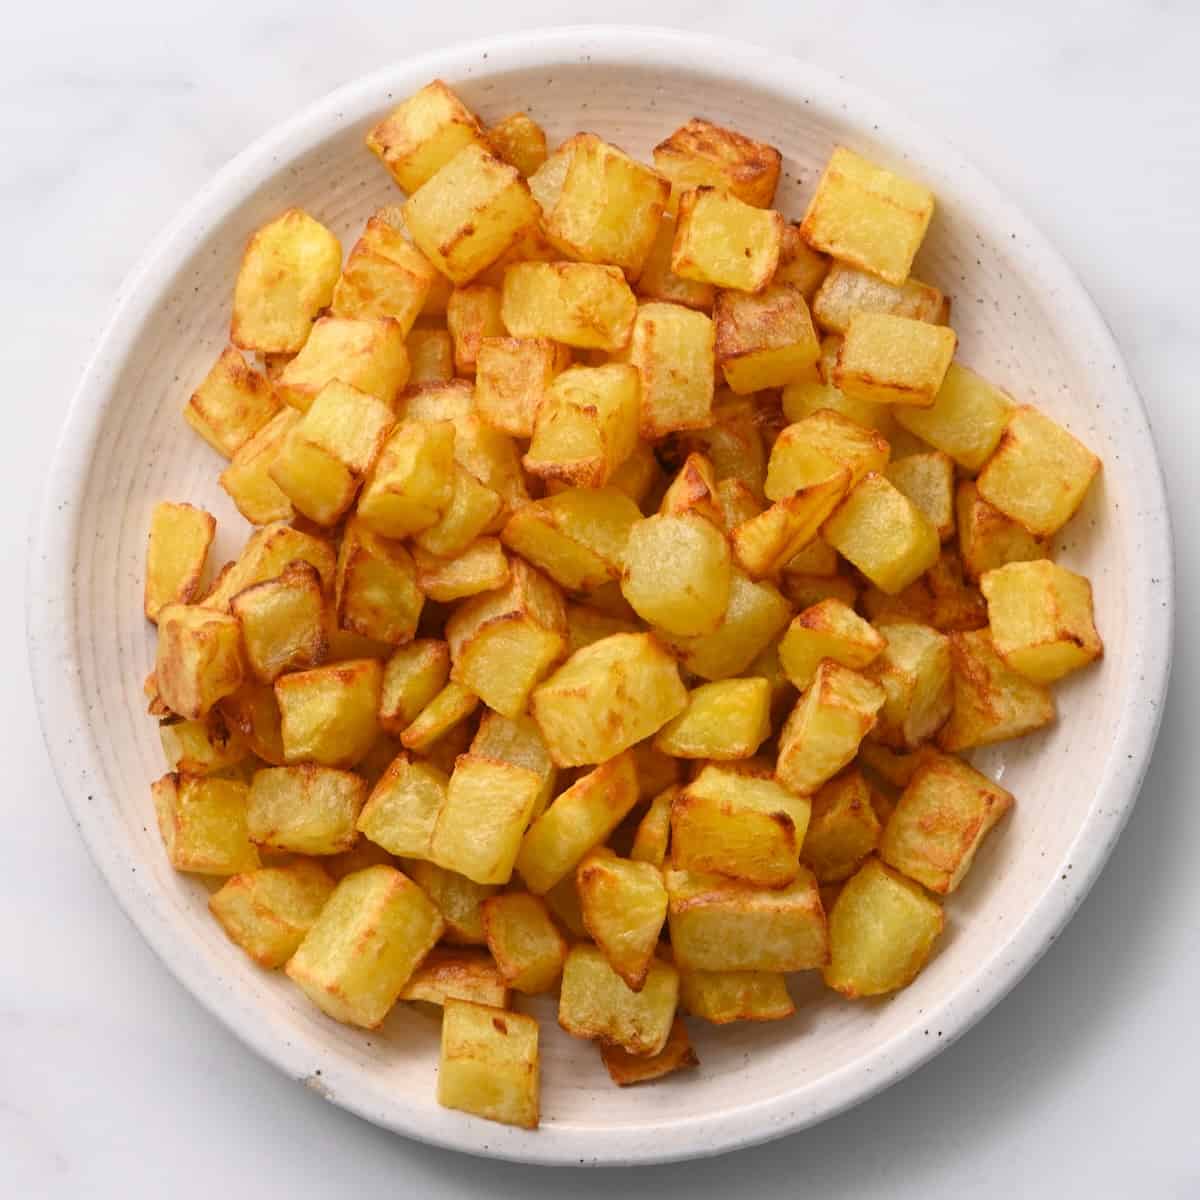 A plate with cooked chopped potatoes